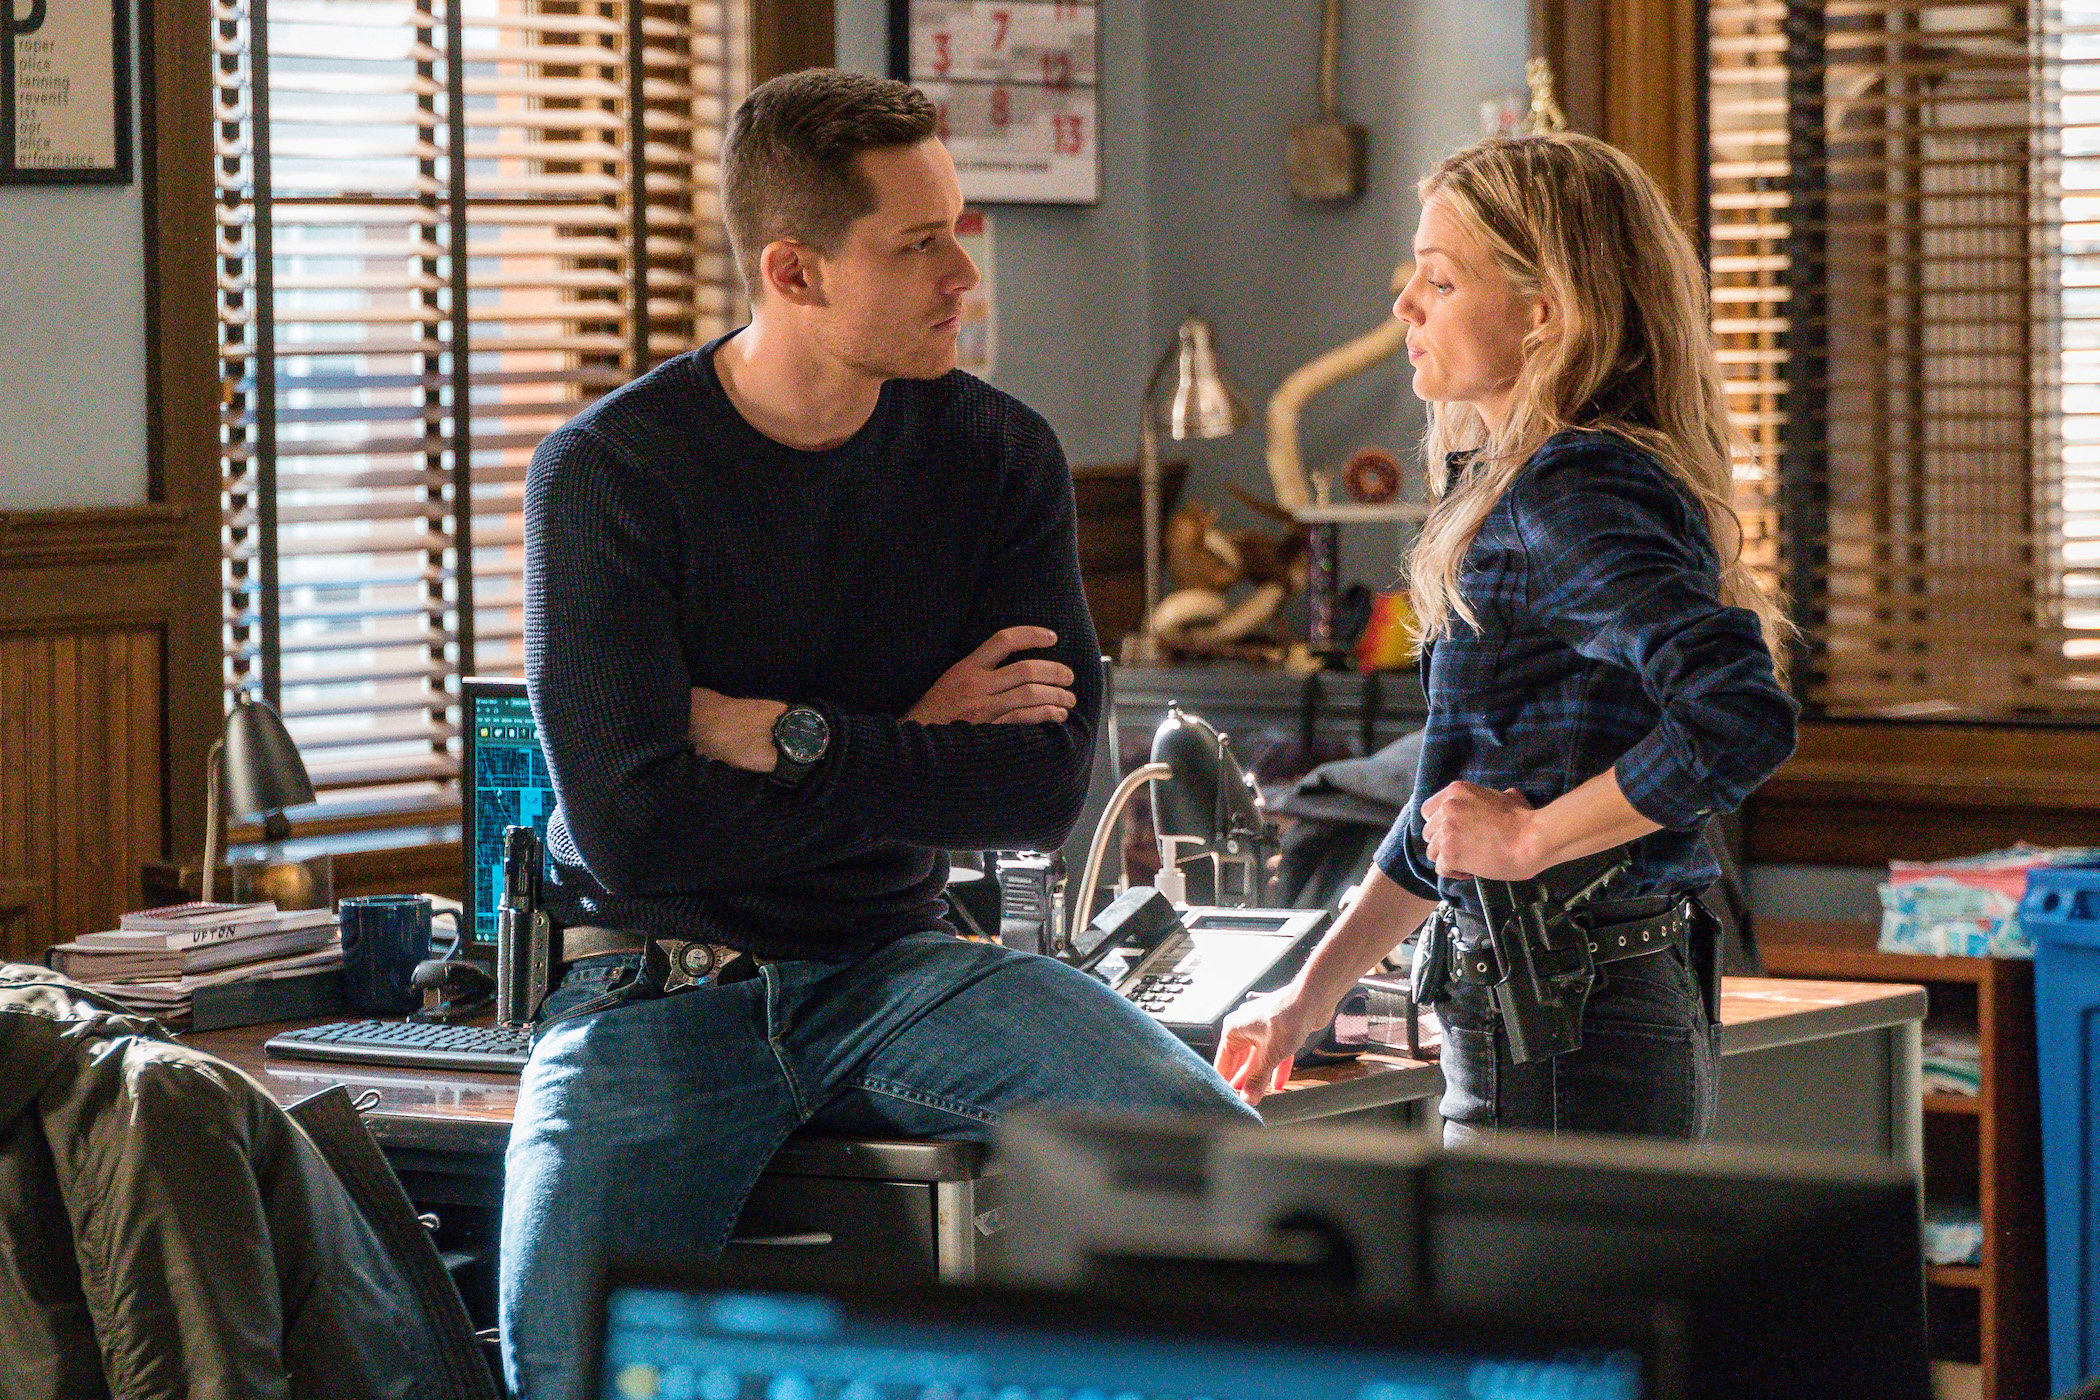 Jay Halstead and Hailey Upton of Chicago P.D., facing one another and talking at the precinct.